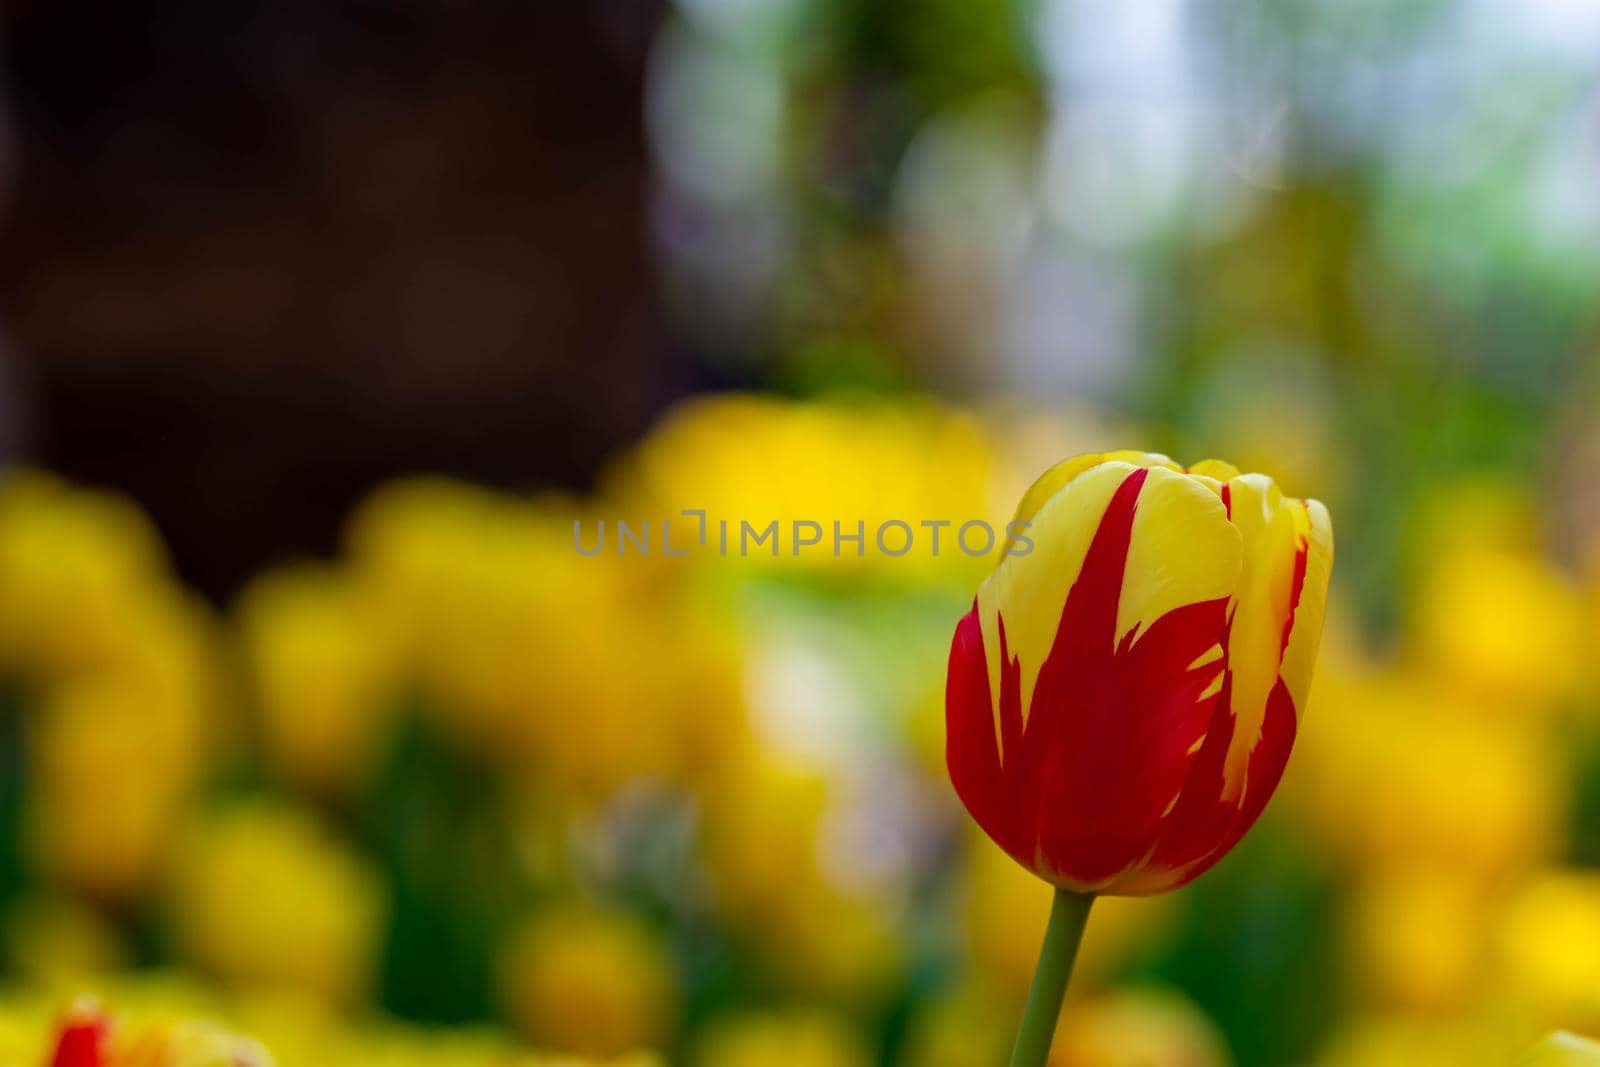 Red and yellow tulips with blurry yellow background by billroque